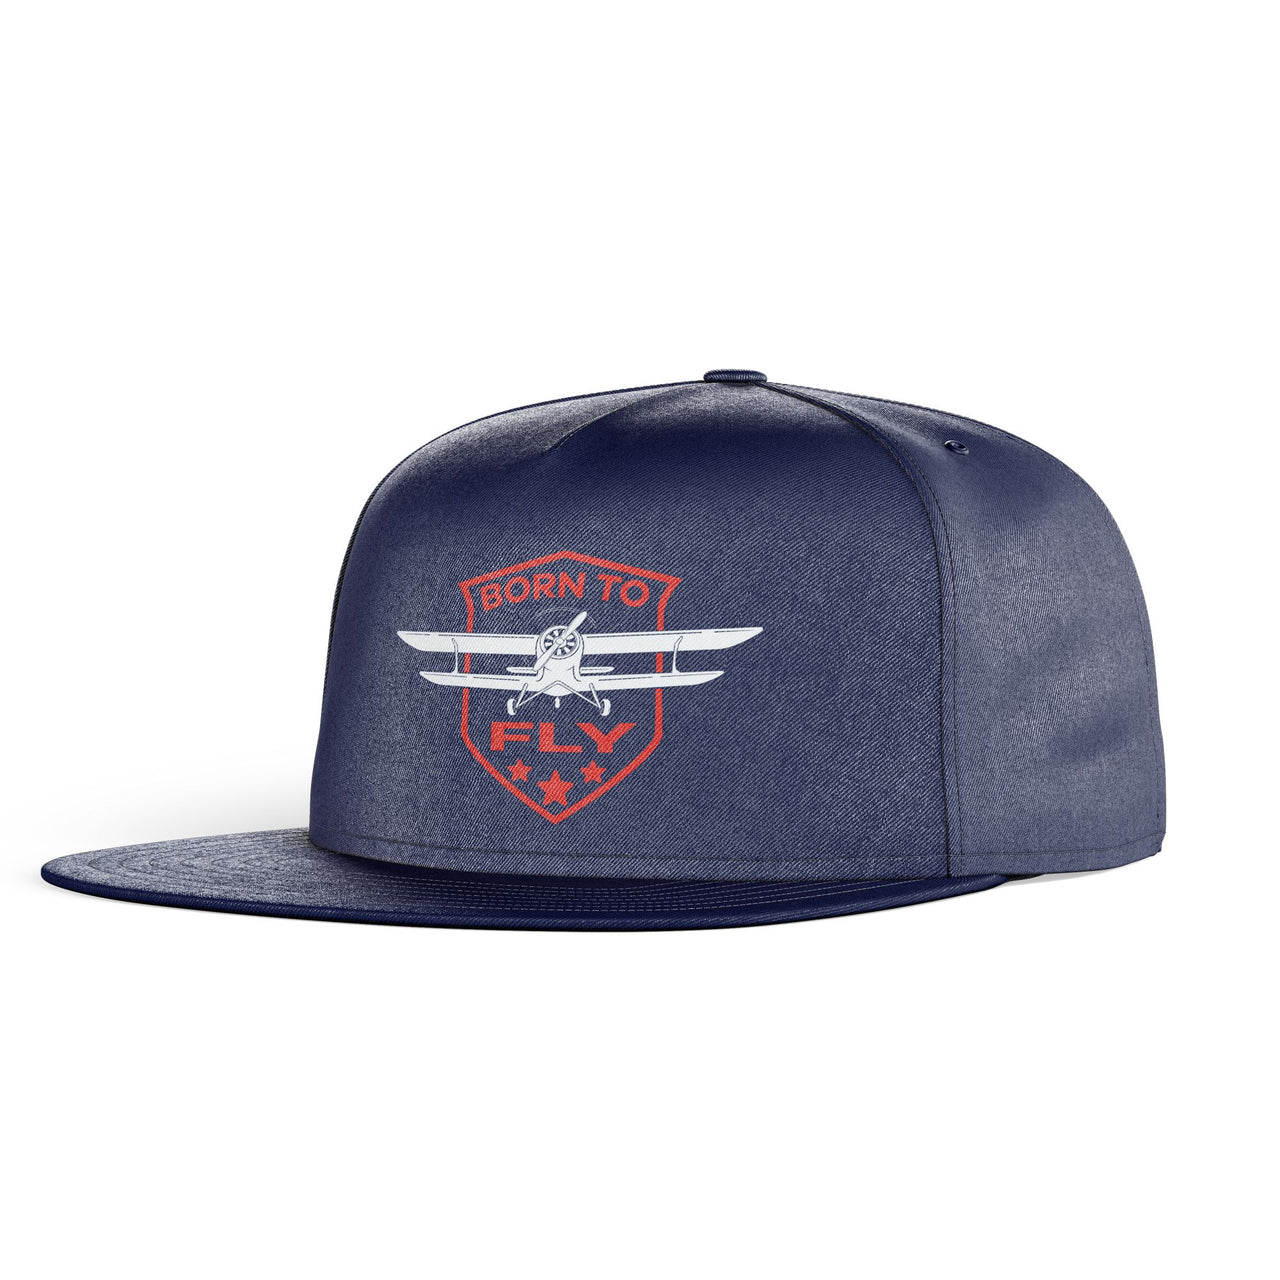 Super Born To Fly Designed Snapback Caps & Hats